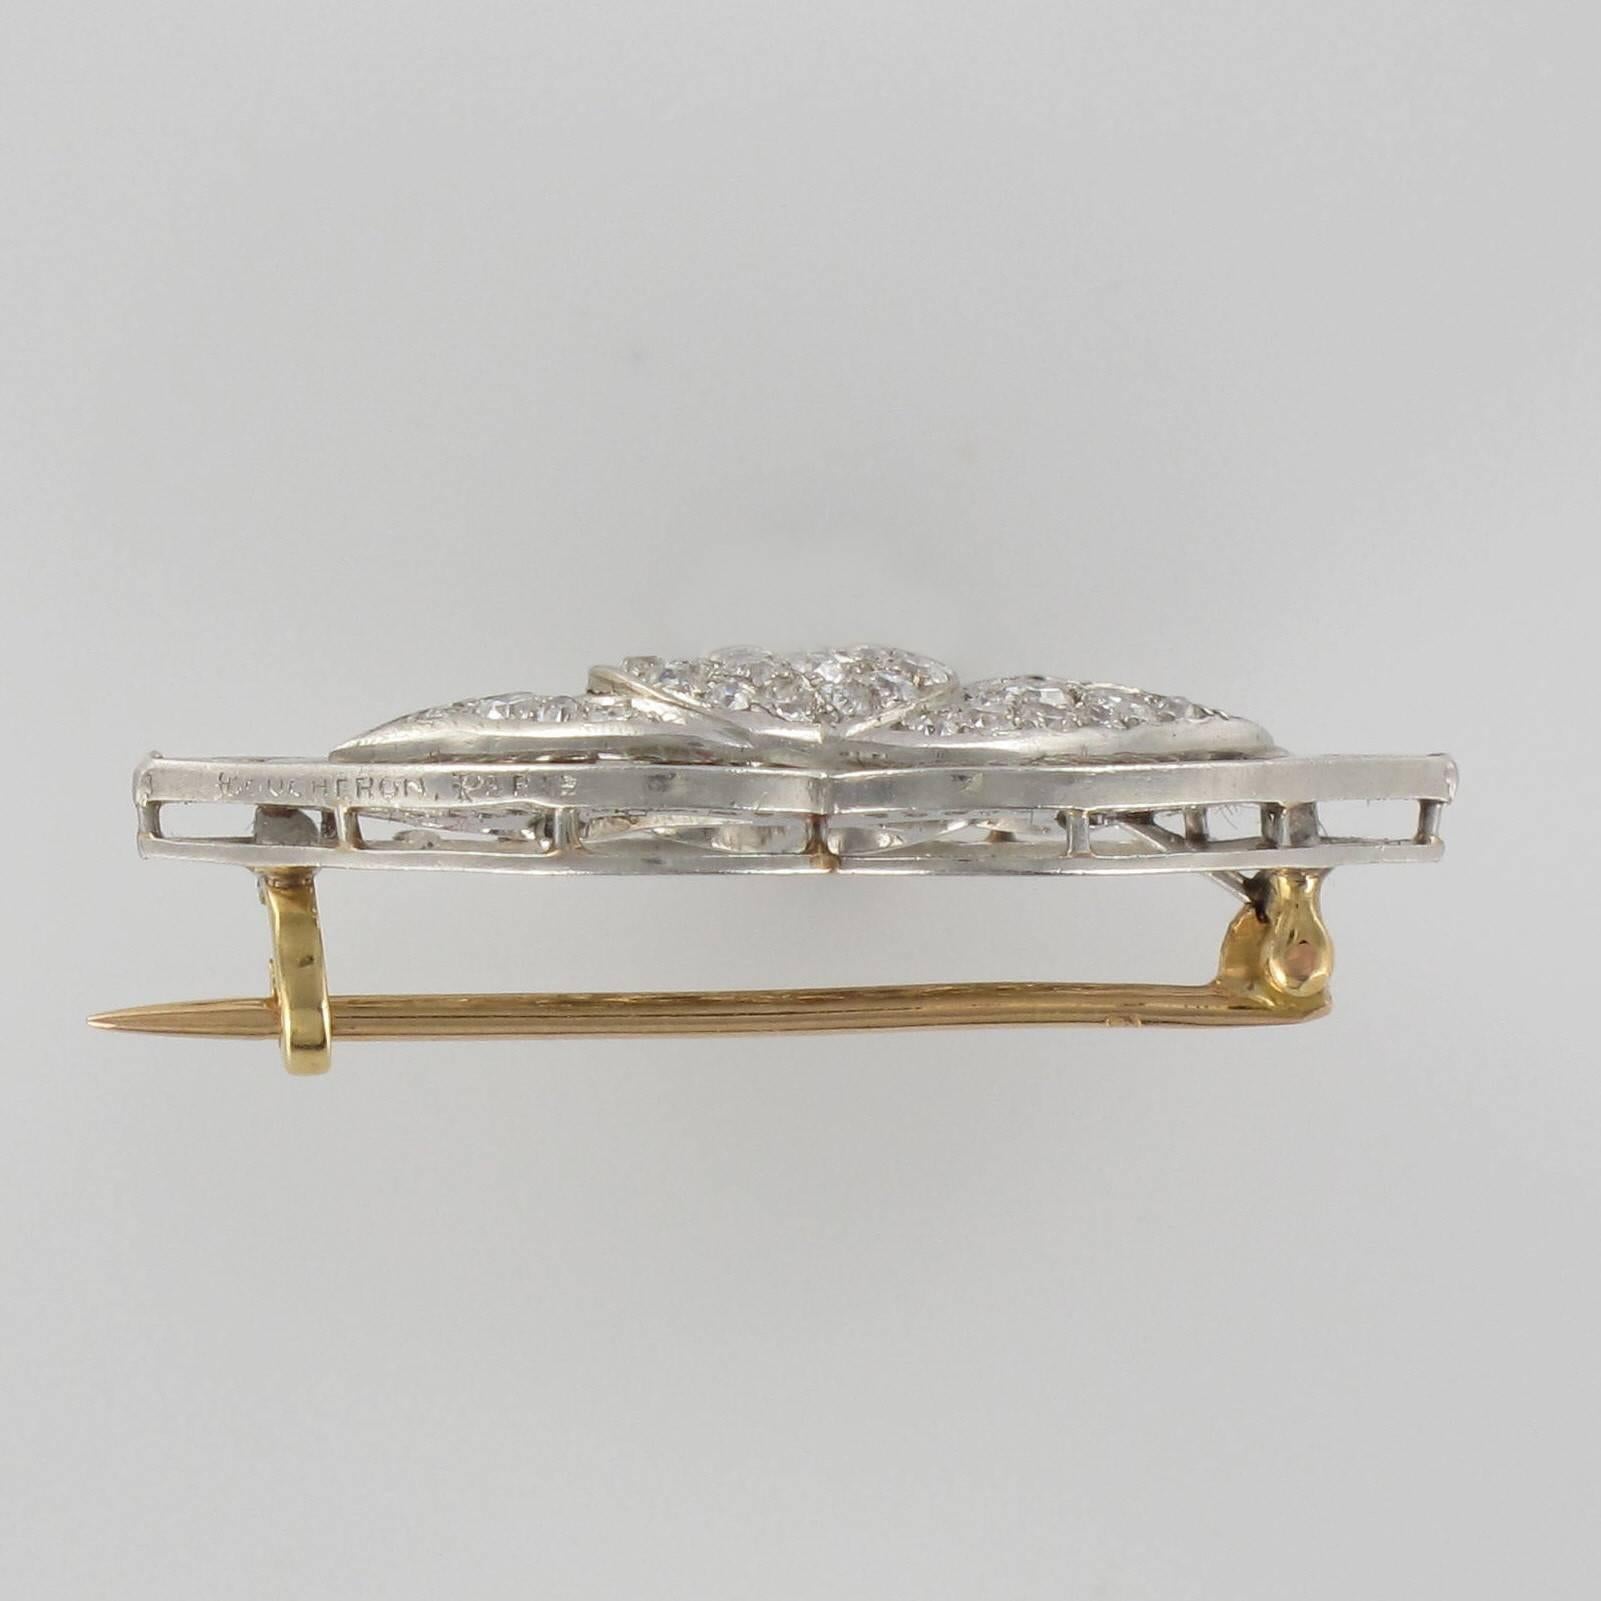 Brooch in platinium and 18 carat rose gold, eagle and dog heads hallmarks. 

This superb platinum brooch is composed of openwork with a water lily motif entirely set with brilliant cut diamonds and rose cut diamonds on the pistils. This diamond